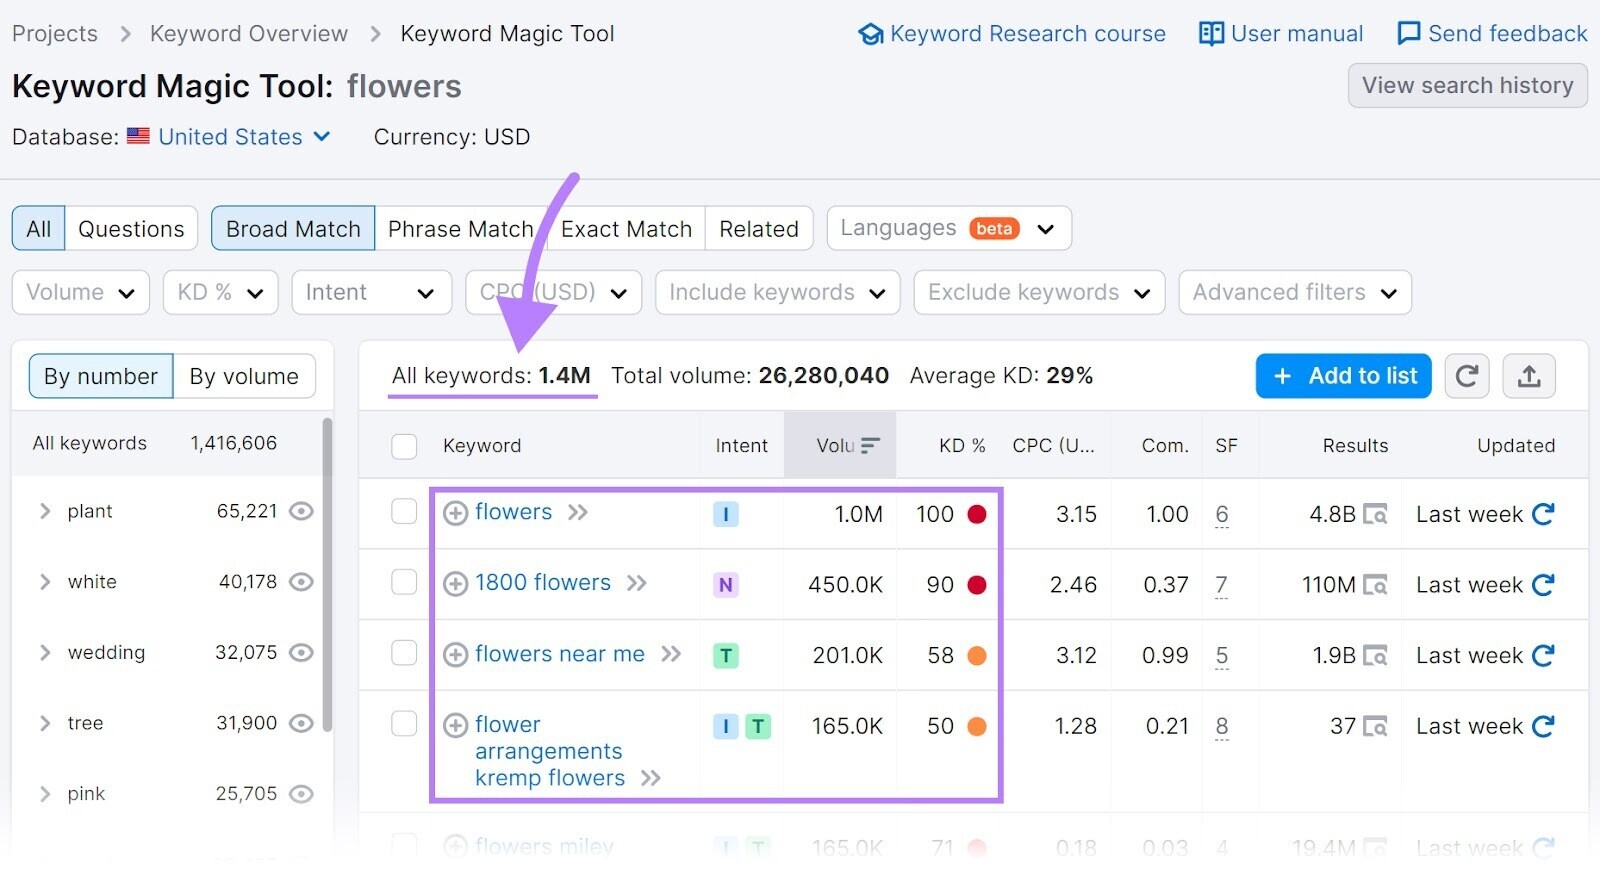 Keyword Magic Tool results for "flowers"